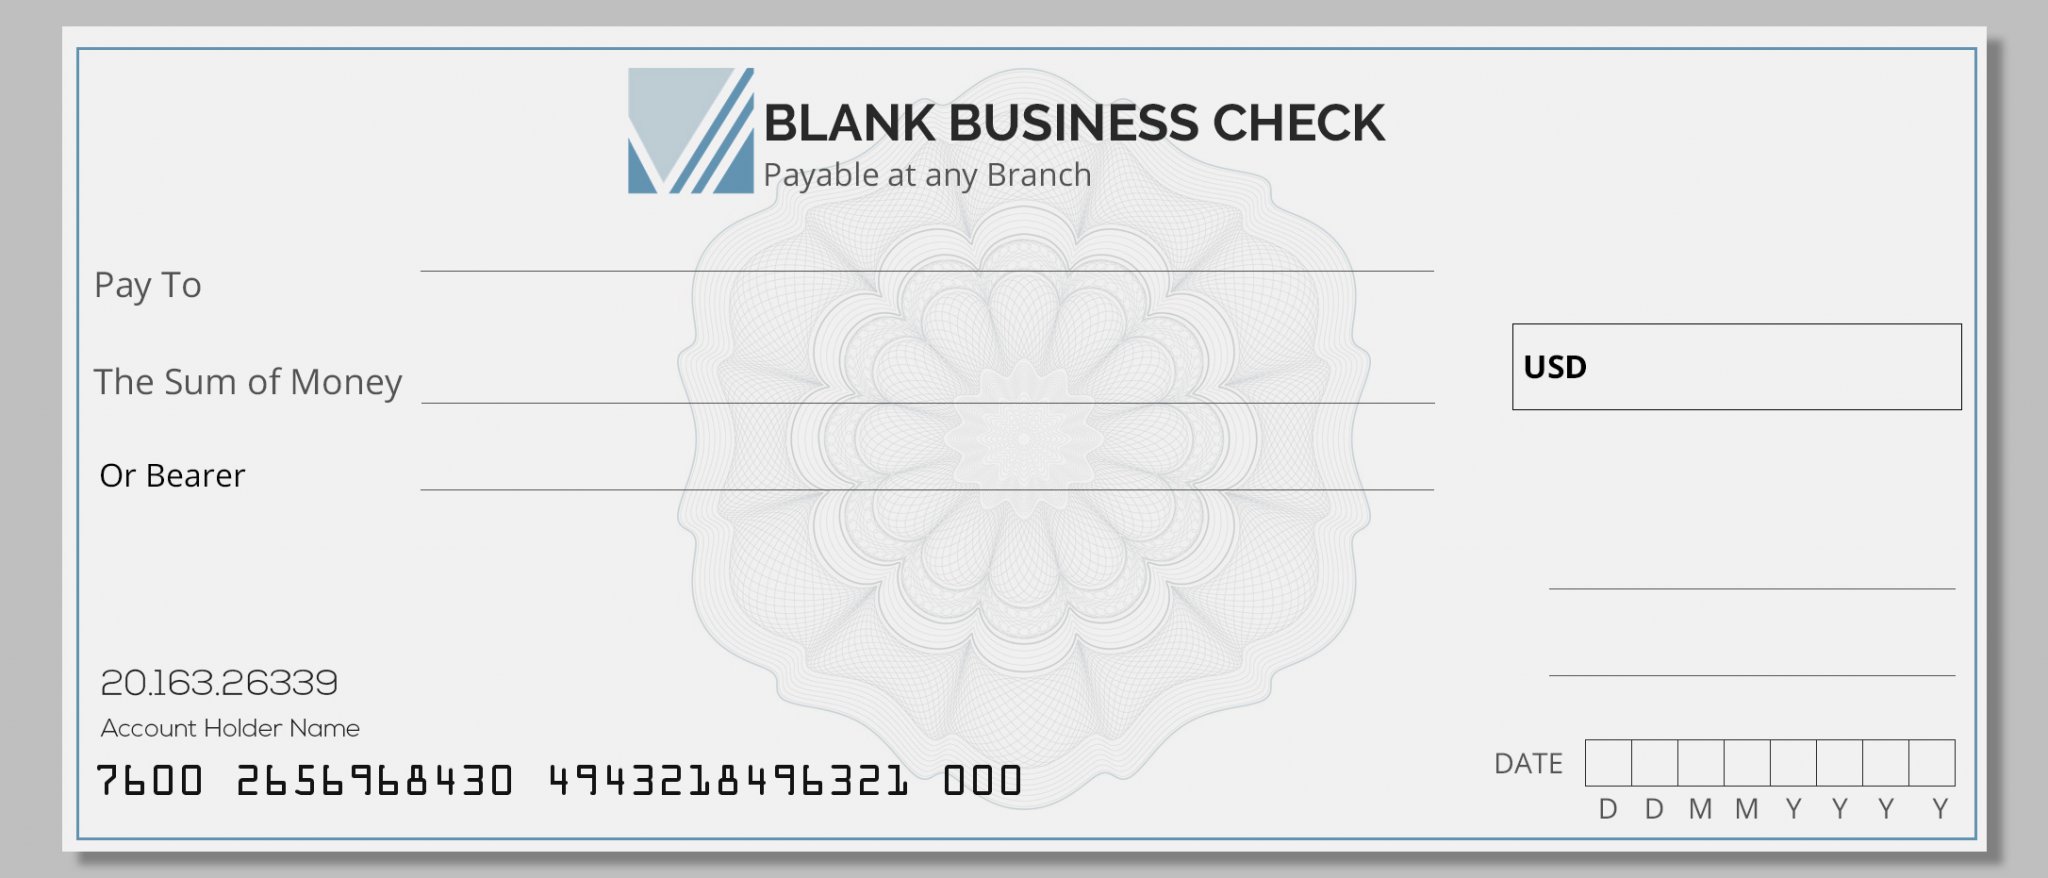 10+ Printable Blank Business Check in psd room